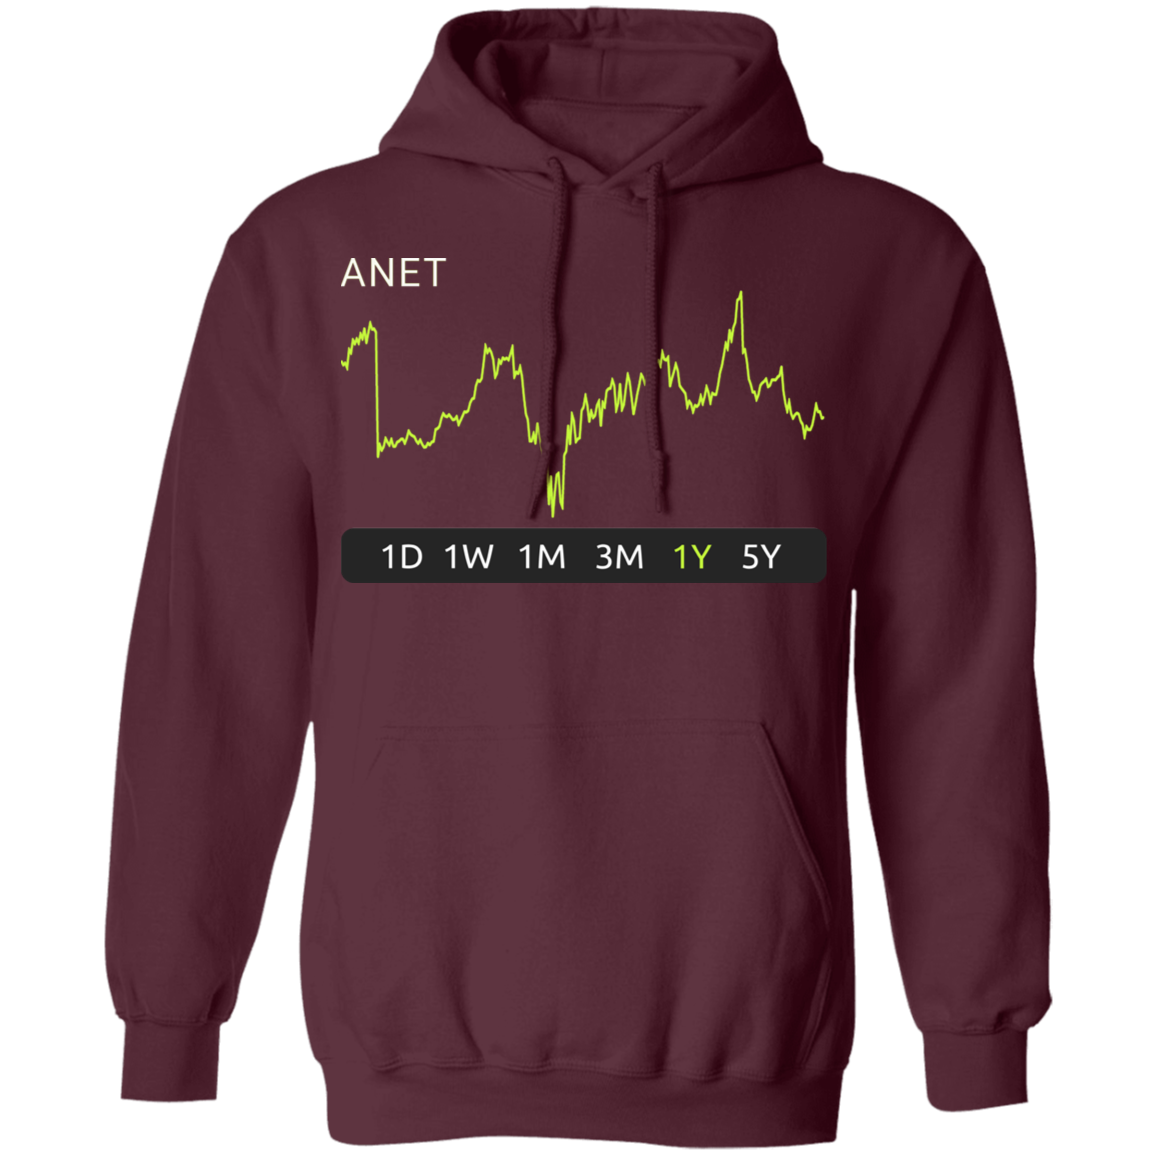 ANET Stock 1y Pullover Hoodie